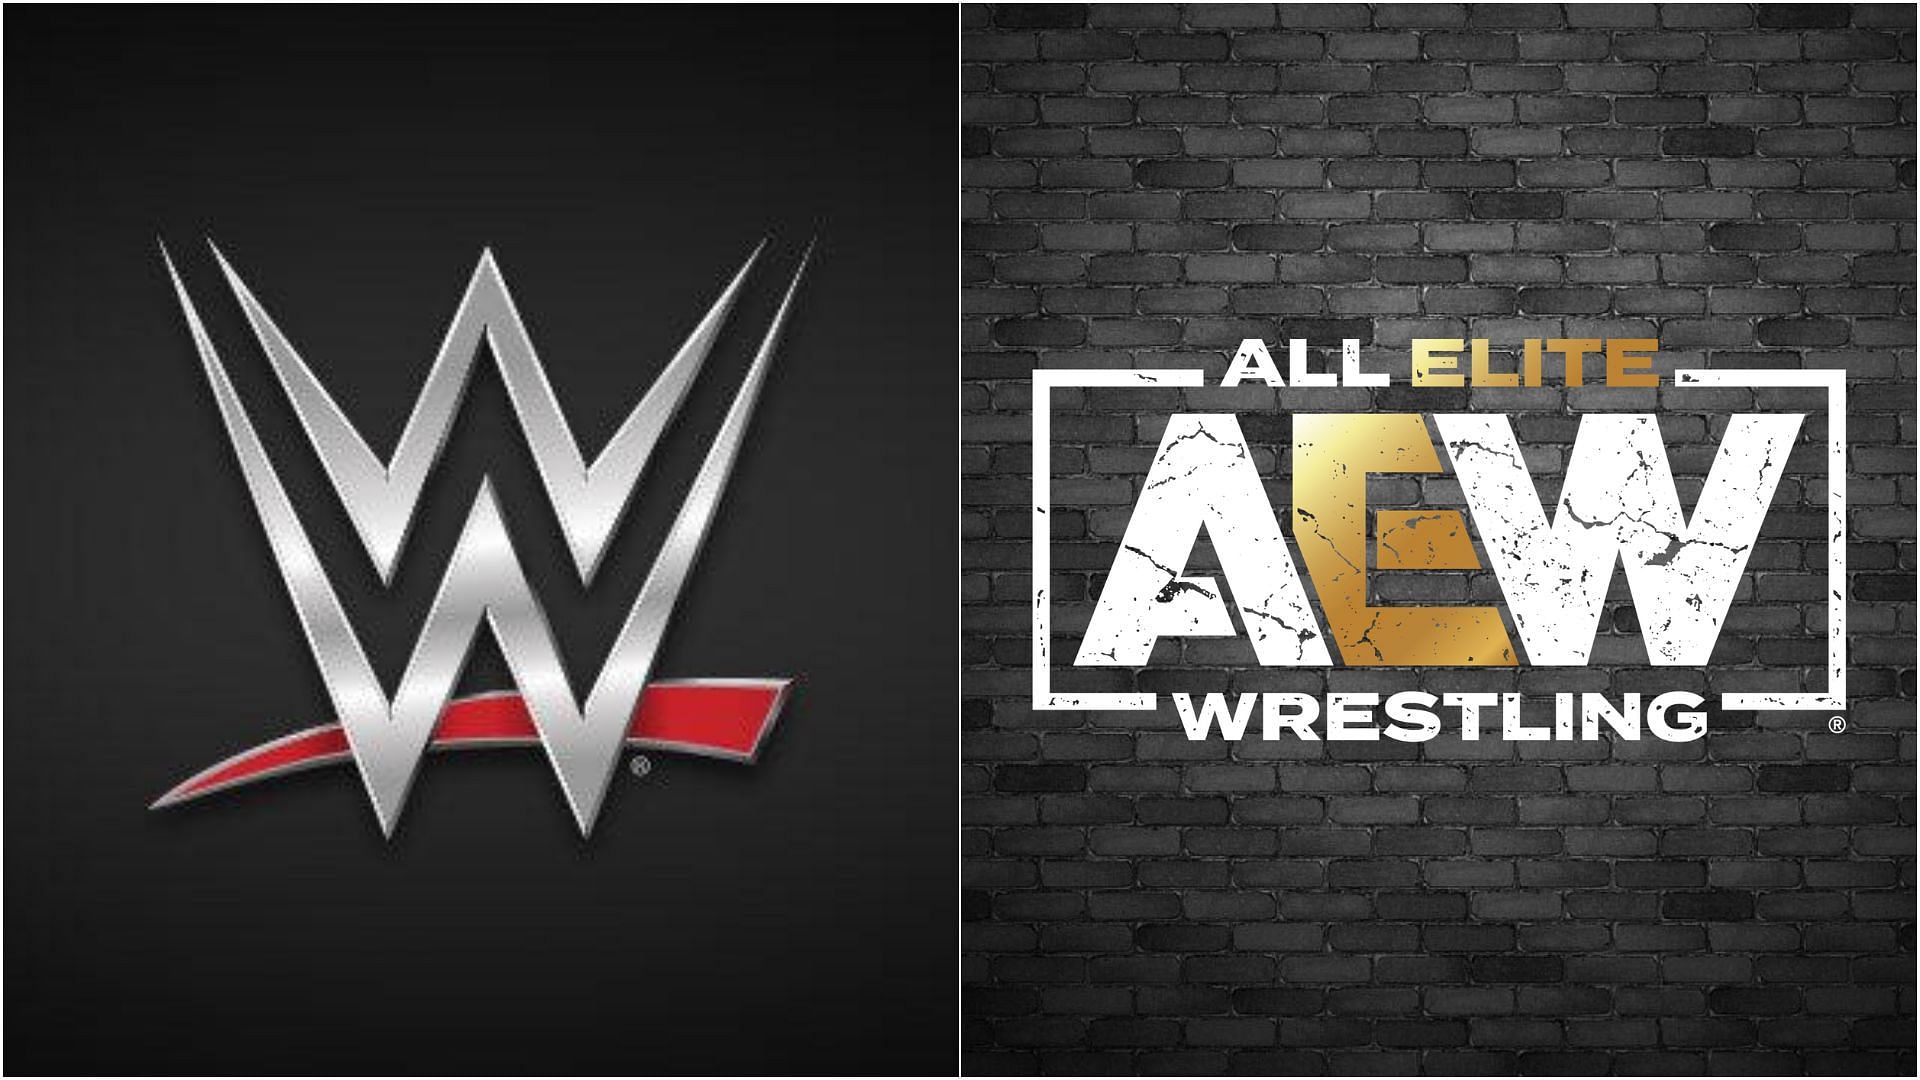 WWE acknowledged an AEW star on a recent show